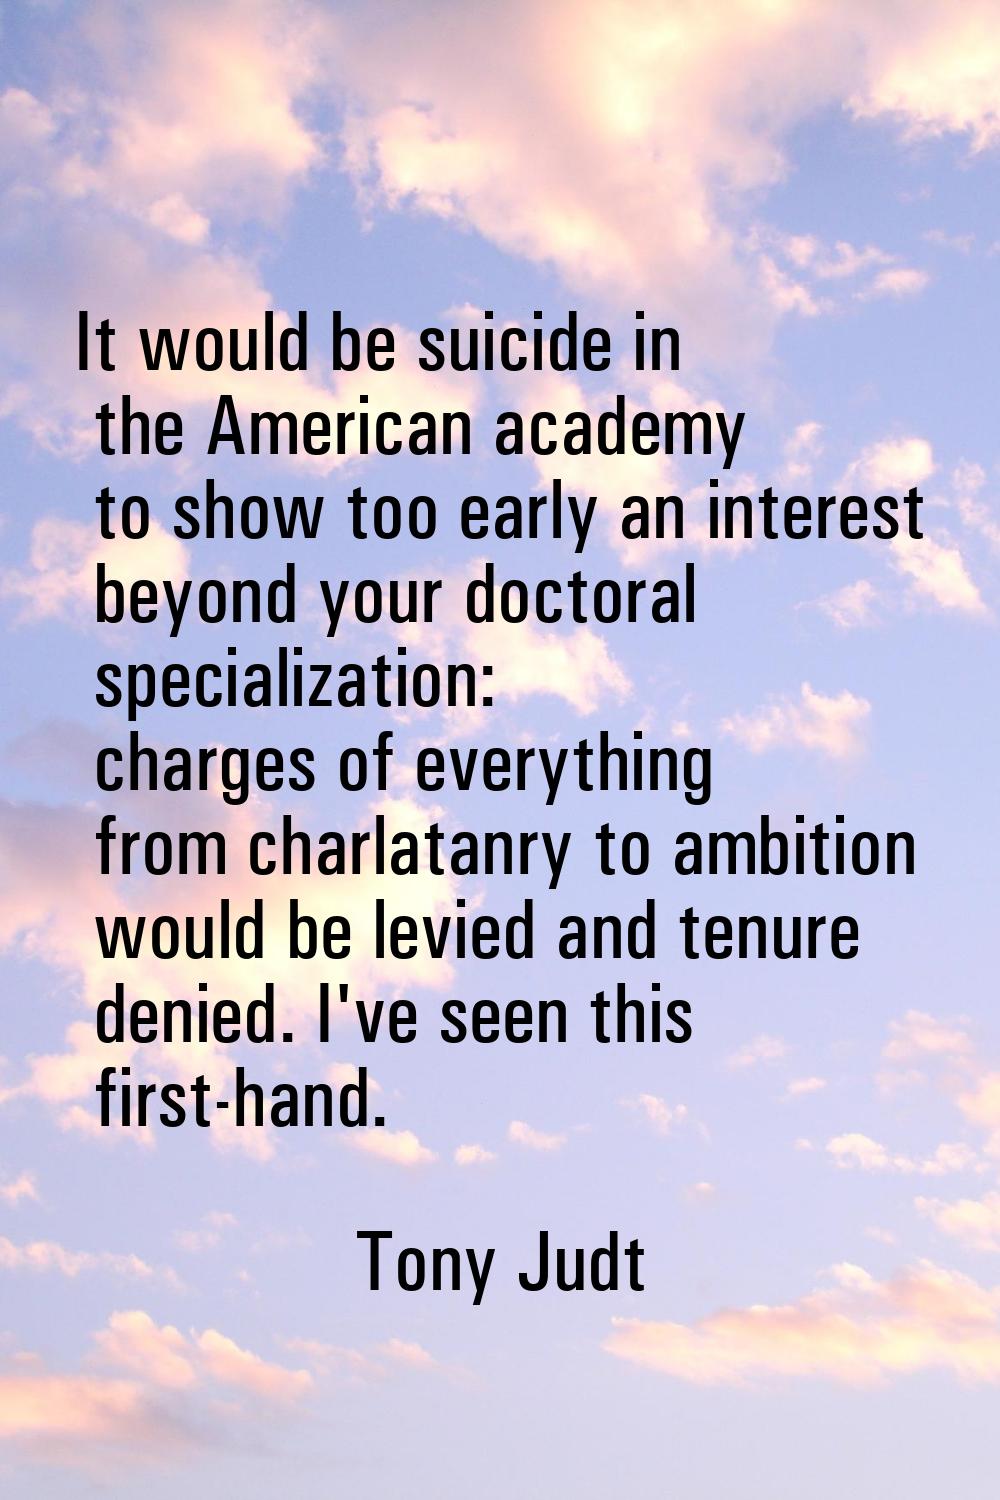 It would be suicide in the American academy to show too early an interest beyond your doctoral spec